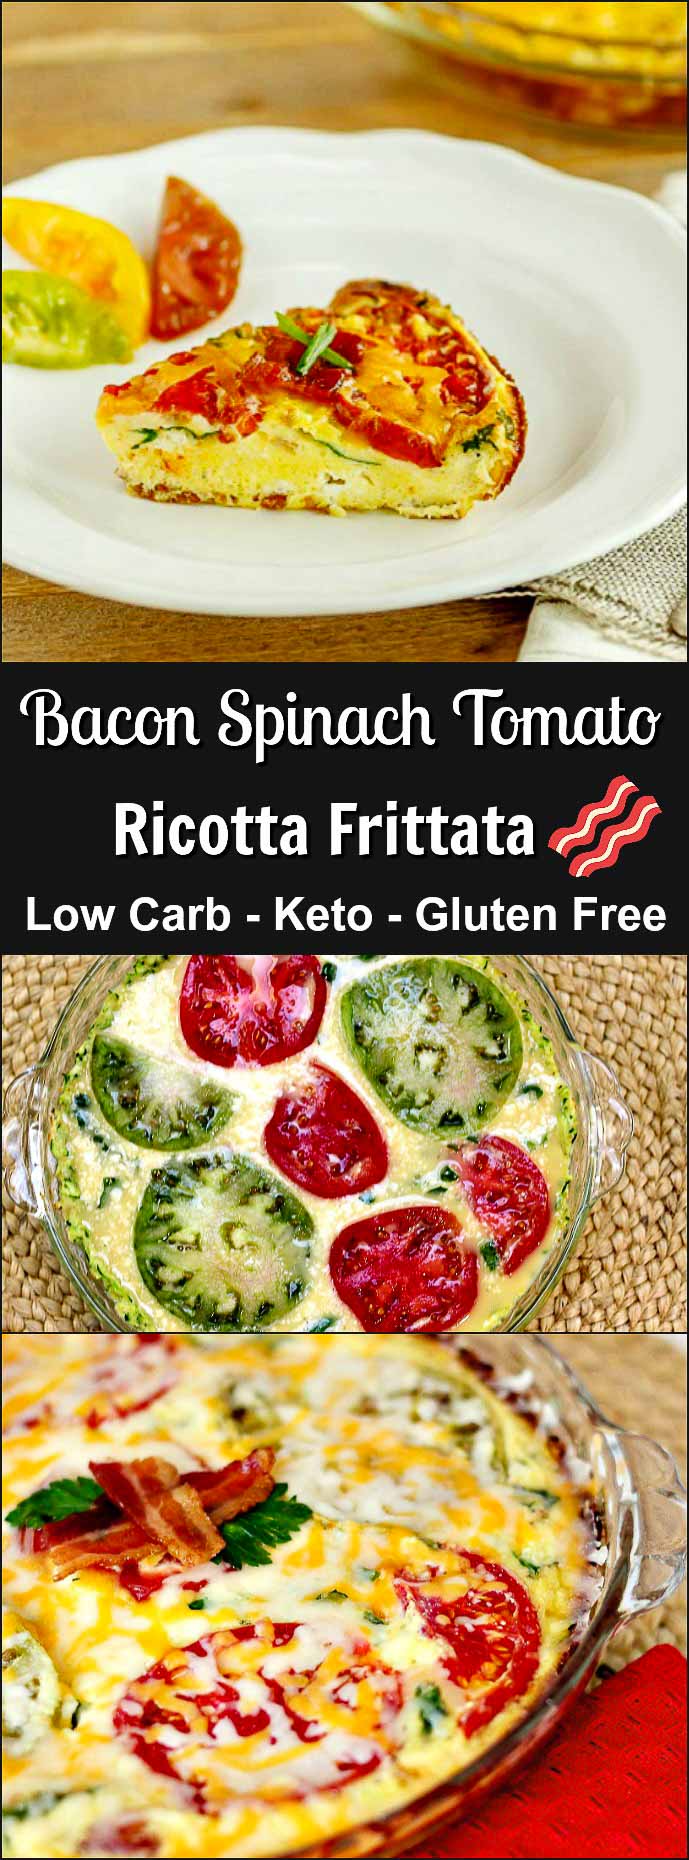 Bacon Spinach Tomato Ricotta Frittata - Low Carb, Gluten Free and easy to make.